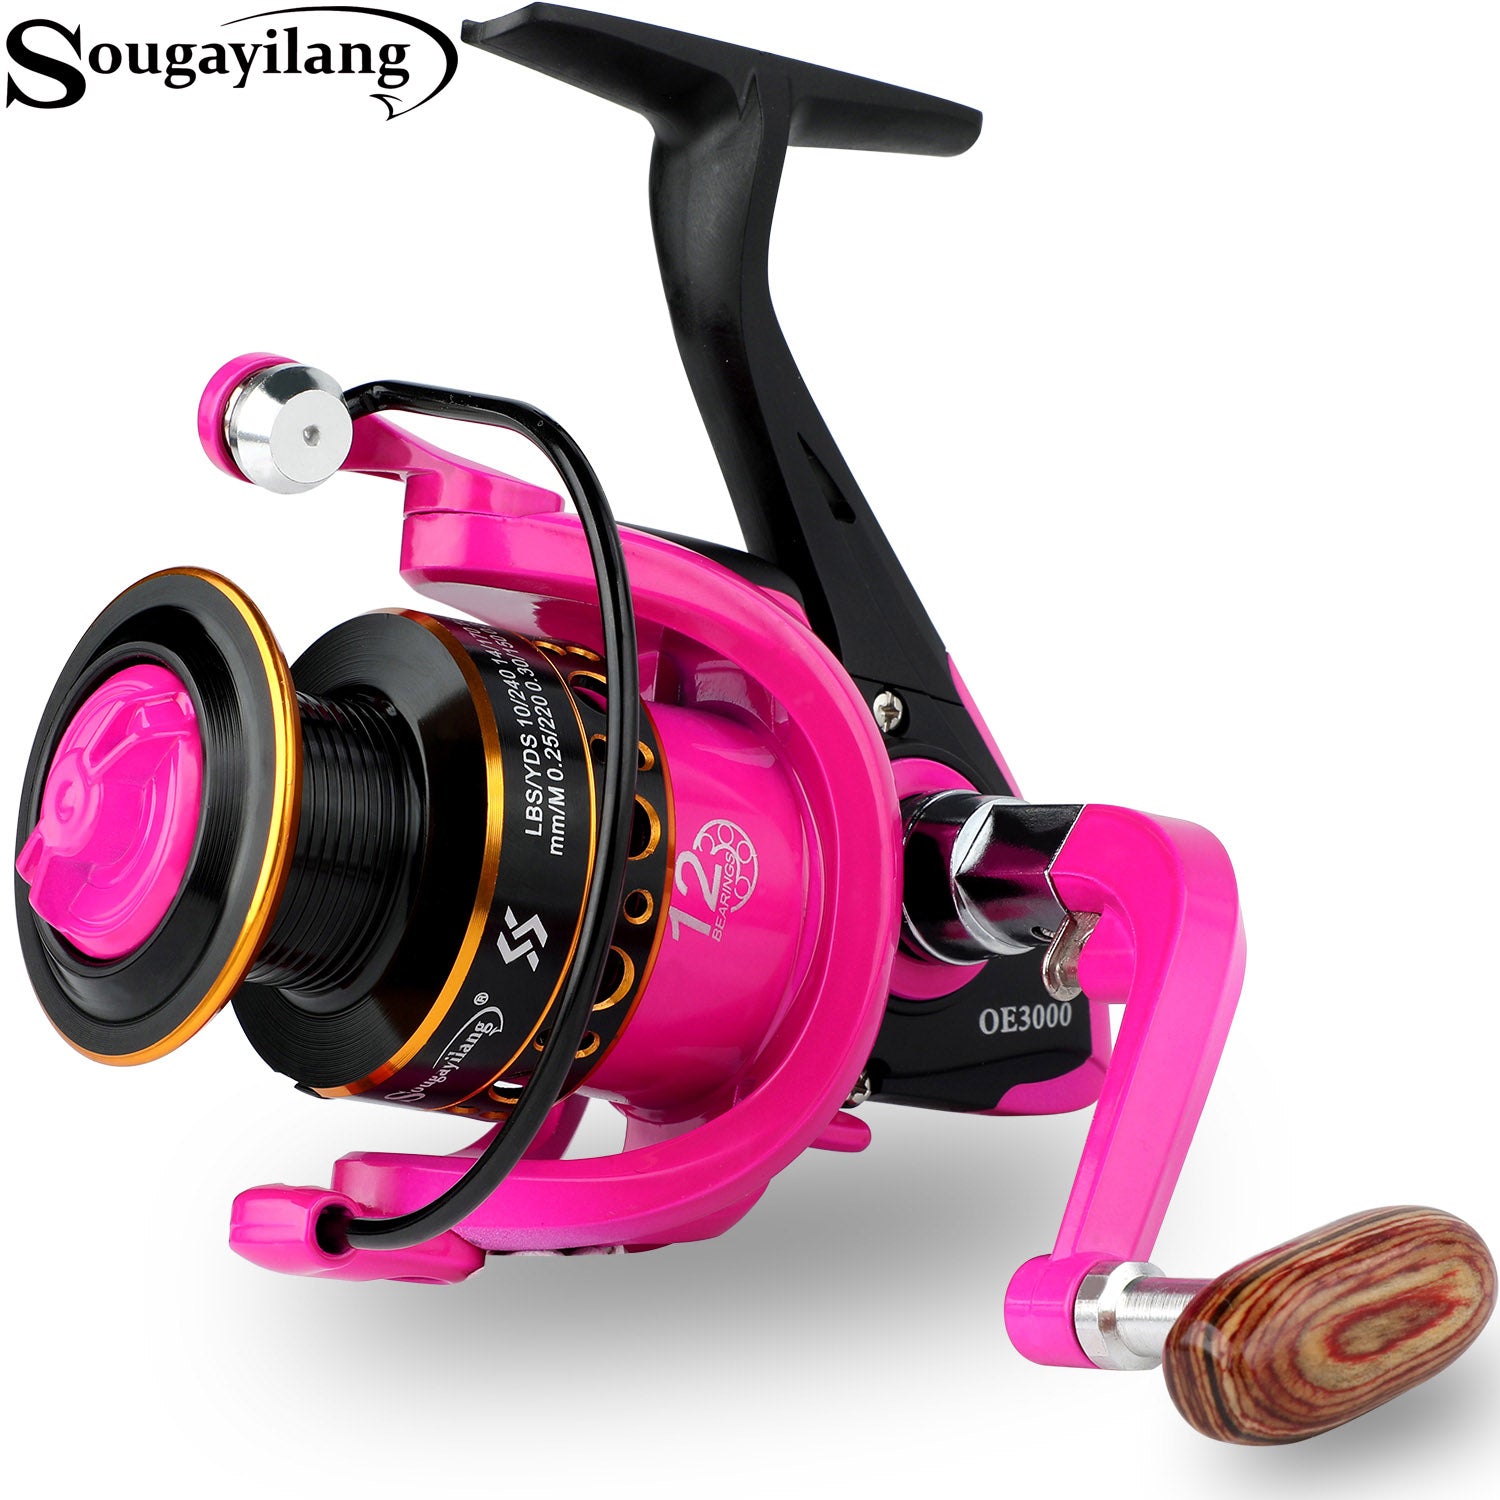 2021 NEW 2000 3000 Fishing Reels Spinning 5.2:1 Ratio 13+1BB Shallow Spool  Suit for Carp Fishing Freshwater Spinning Reel Coil